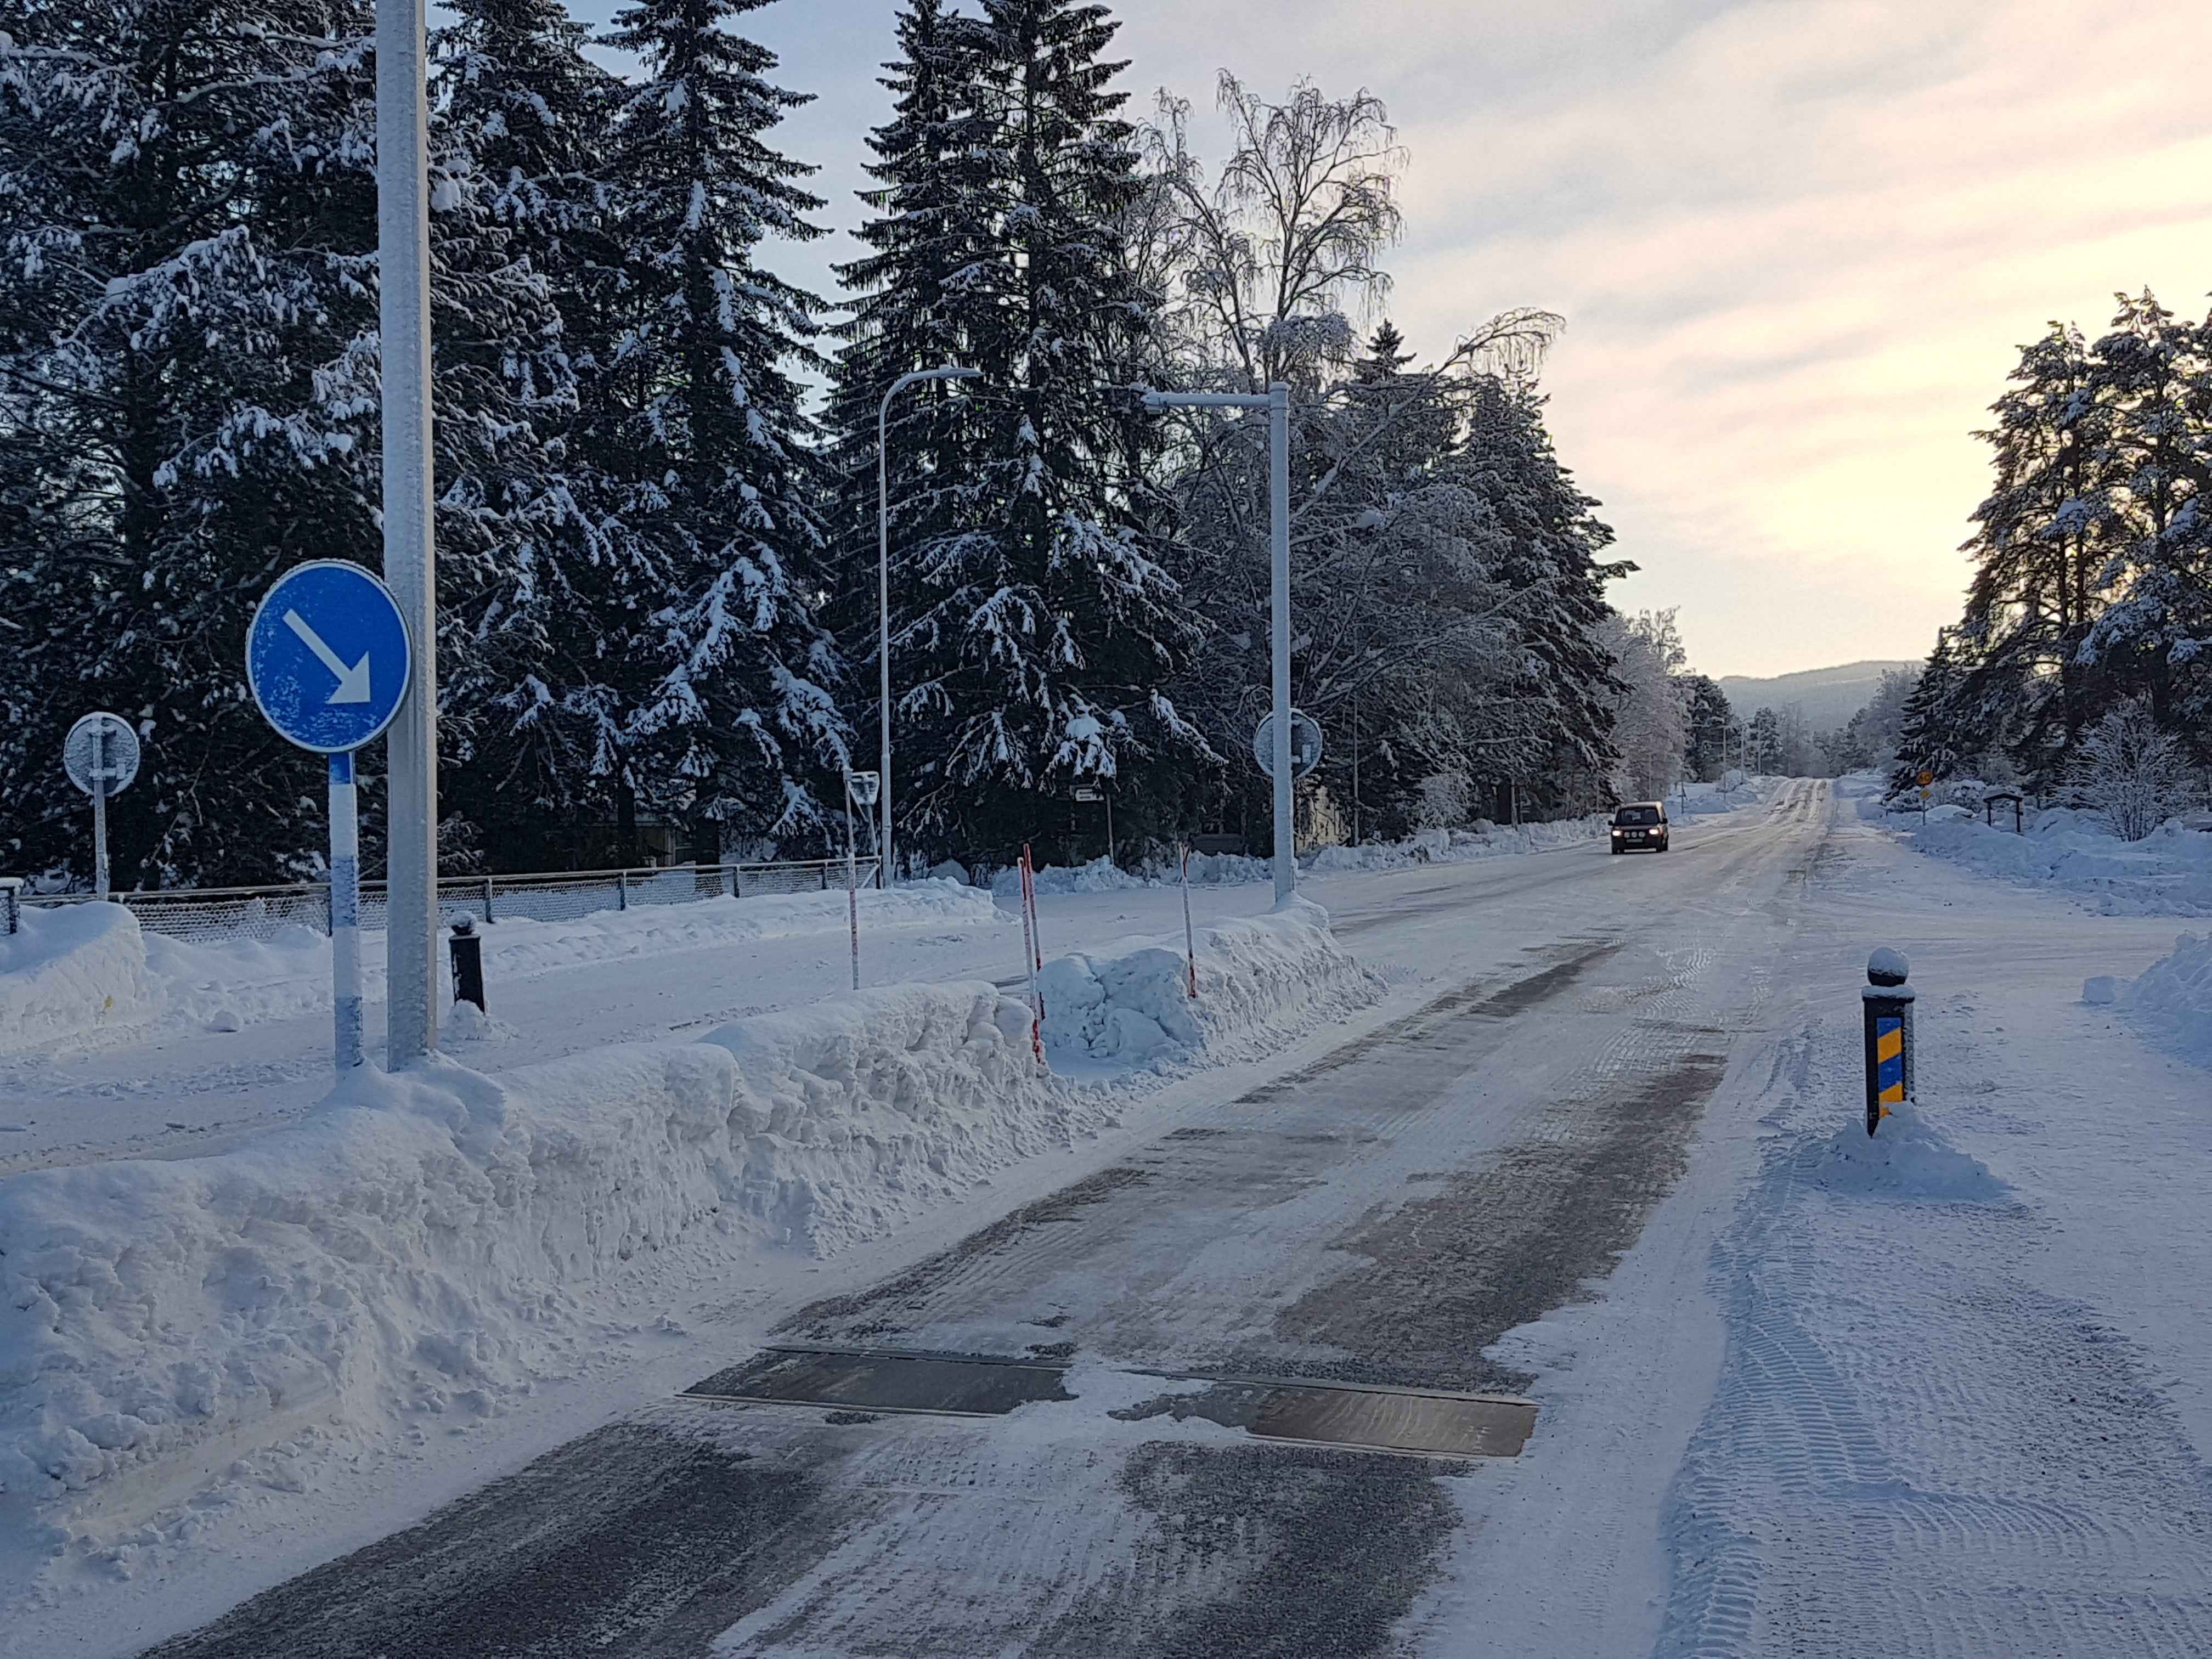 Active speed bumps and the Swedish Transport Administration